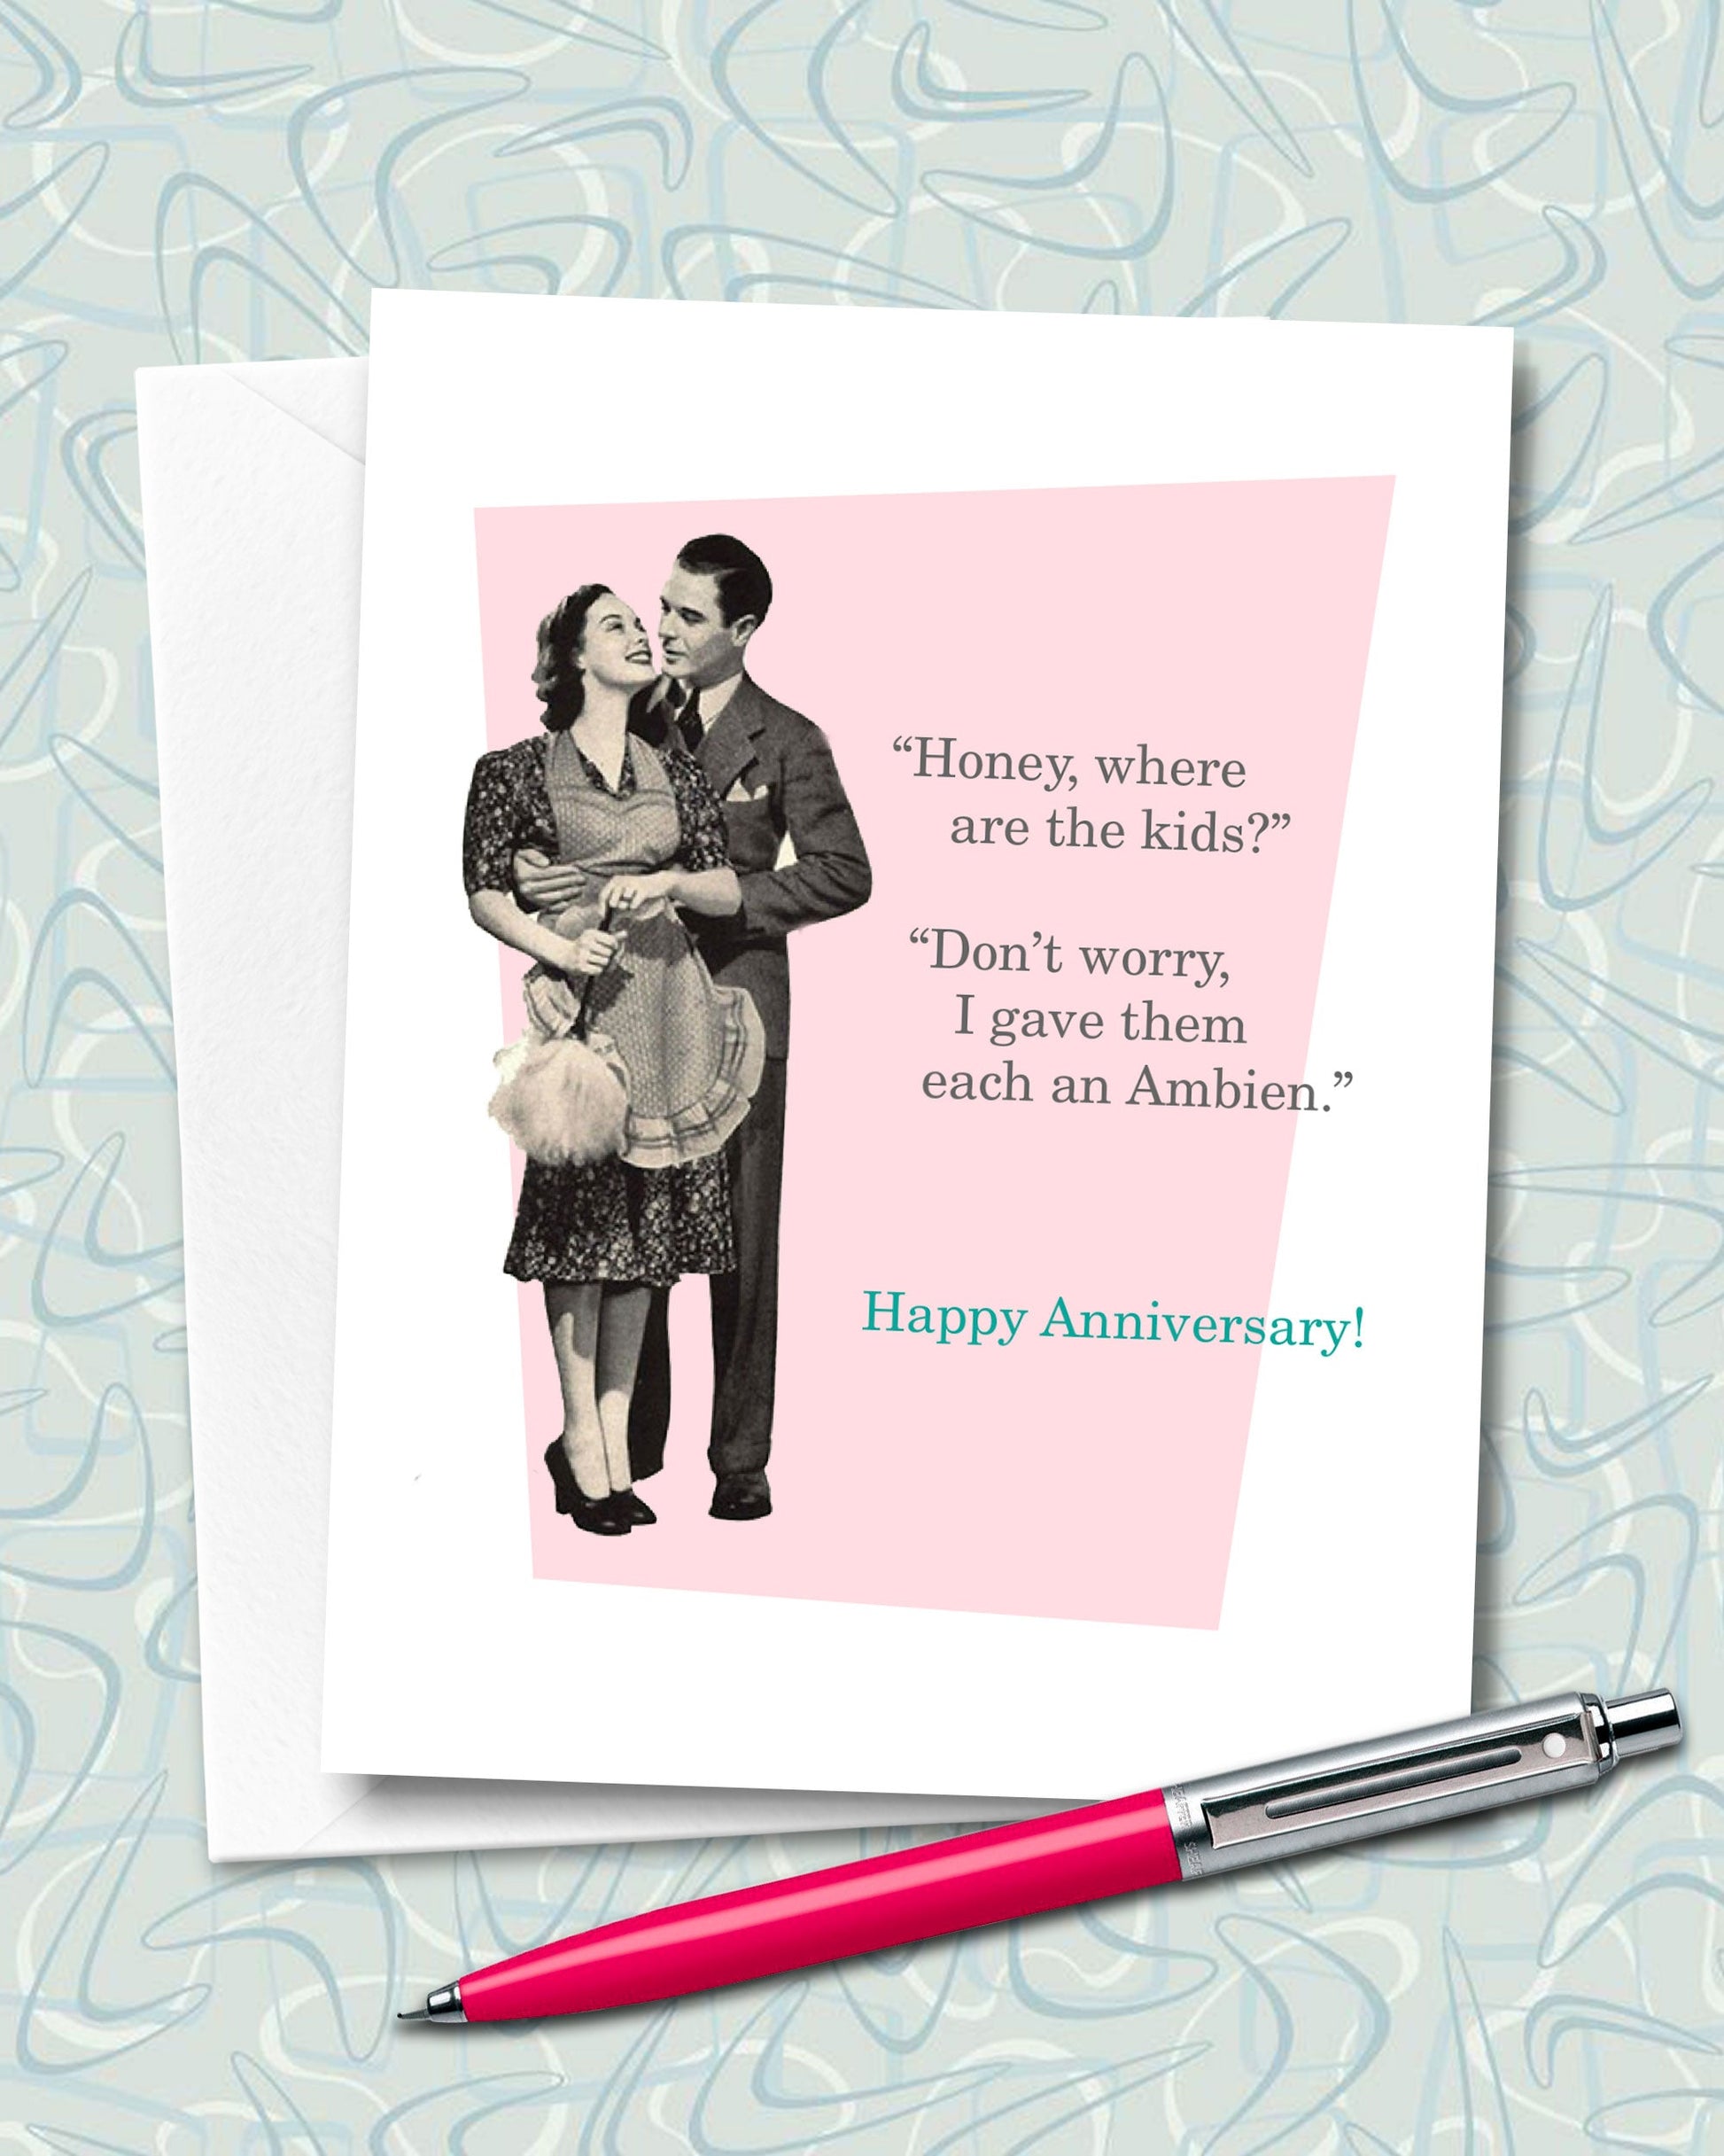 110 Wedding Anniversary Wishes to Write in an Anniversary Card